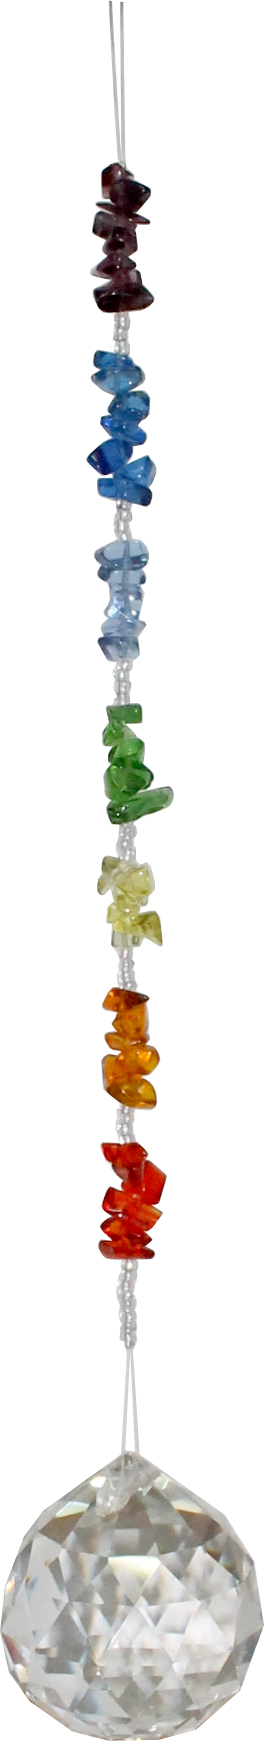 Suspended Crystal with Glass Chakra Stones